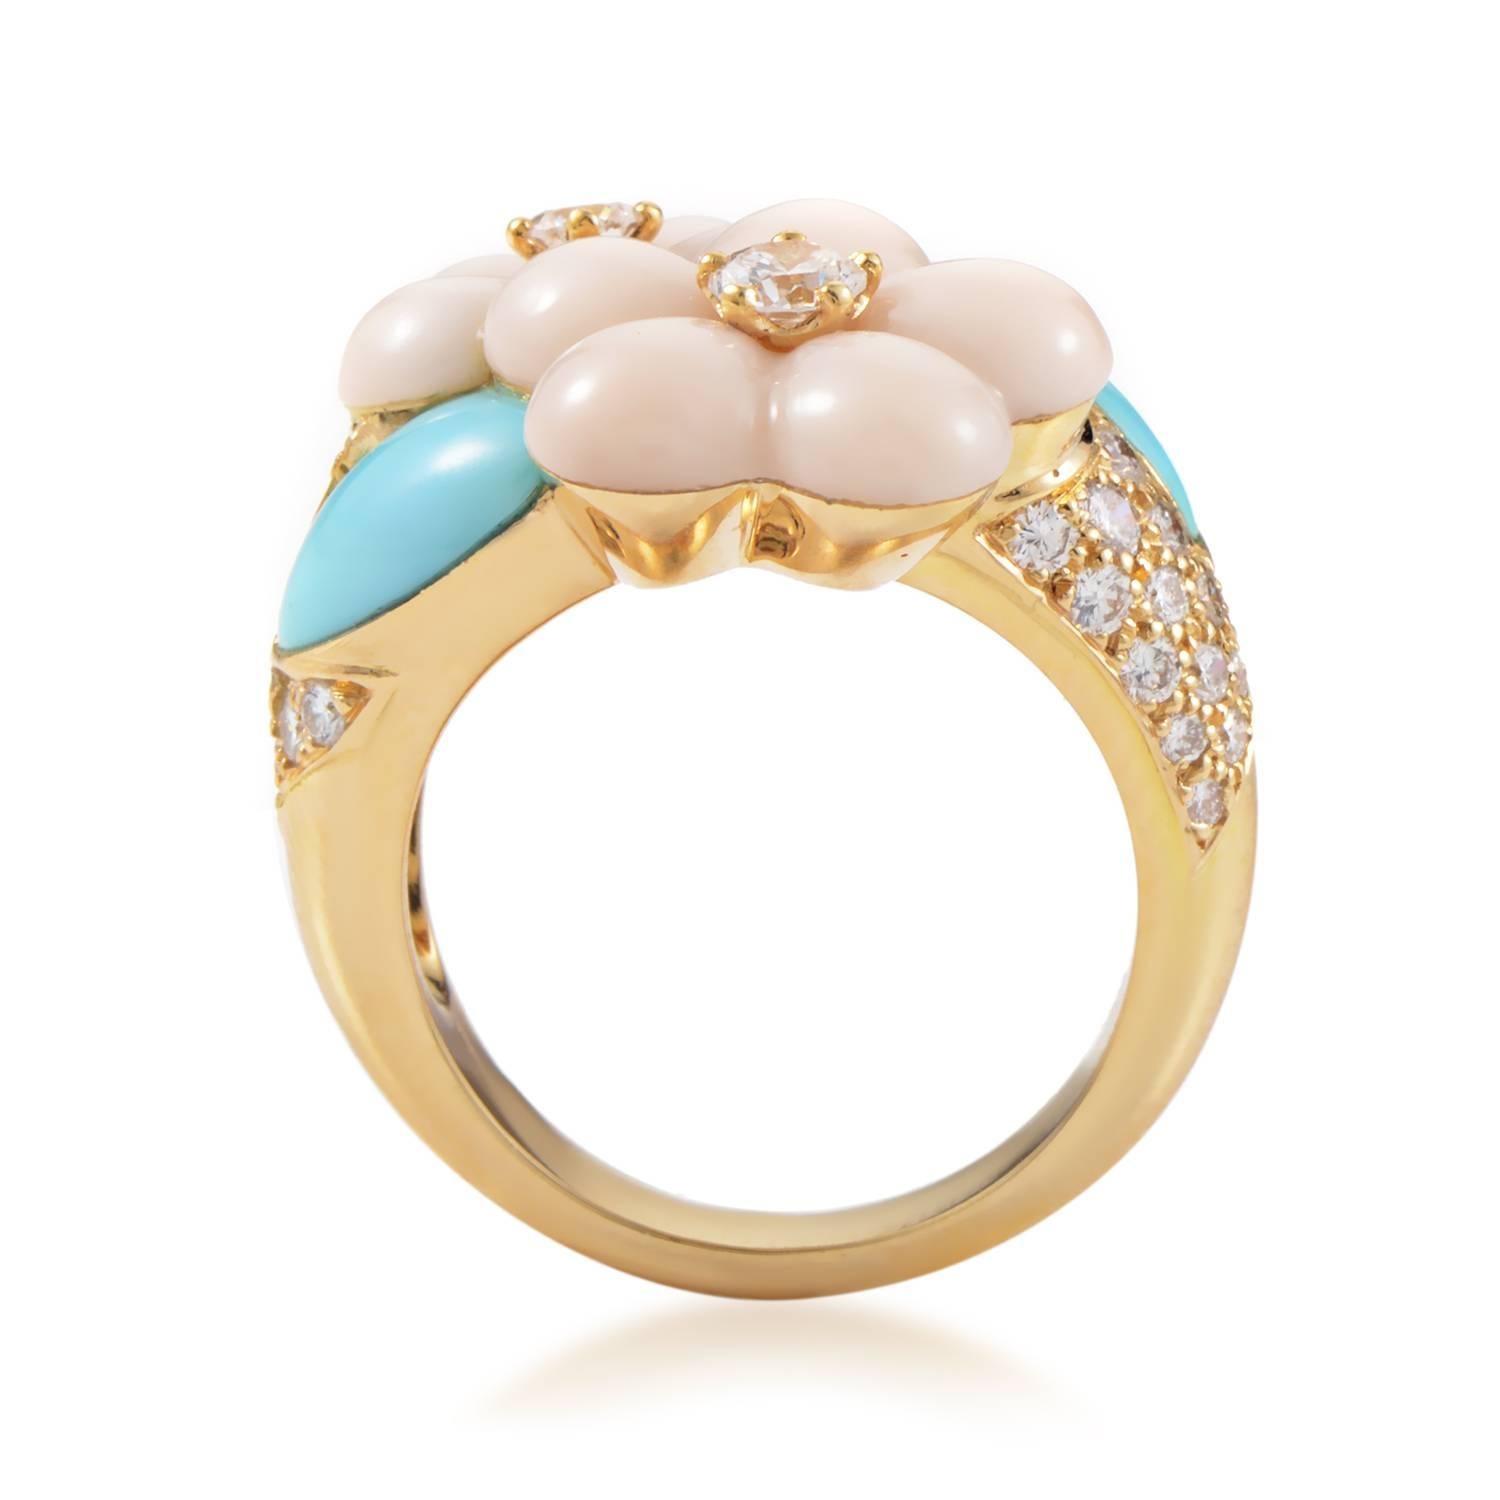 This ring from Van Cleef & Arpels is absolutely gorgeous. The ring is made of 18K yellow gold and features shanks set with .96ct of E color, VVS1 clarity diamonds. Lastly, coral flowers with diamond centers and turquoise leaves add a pop of color to